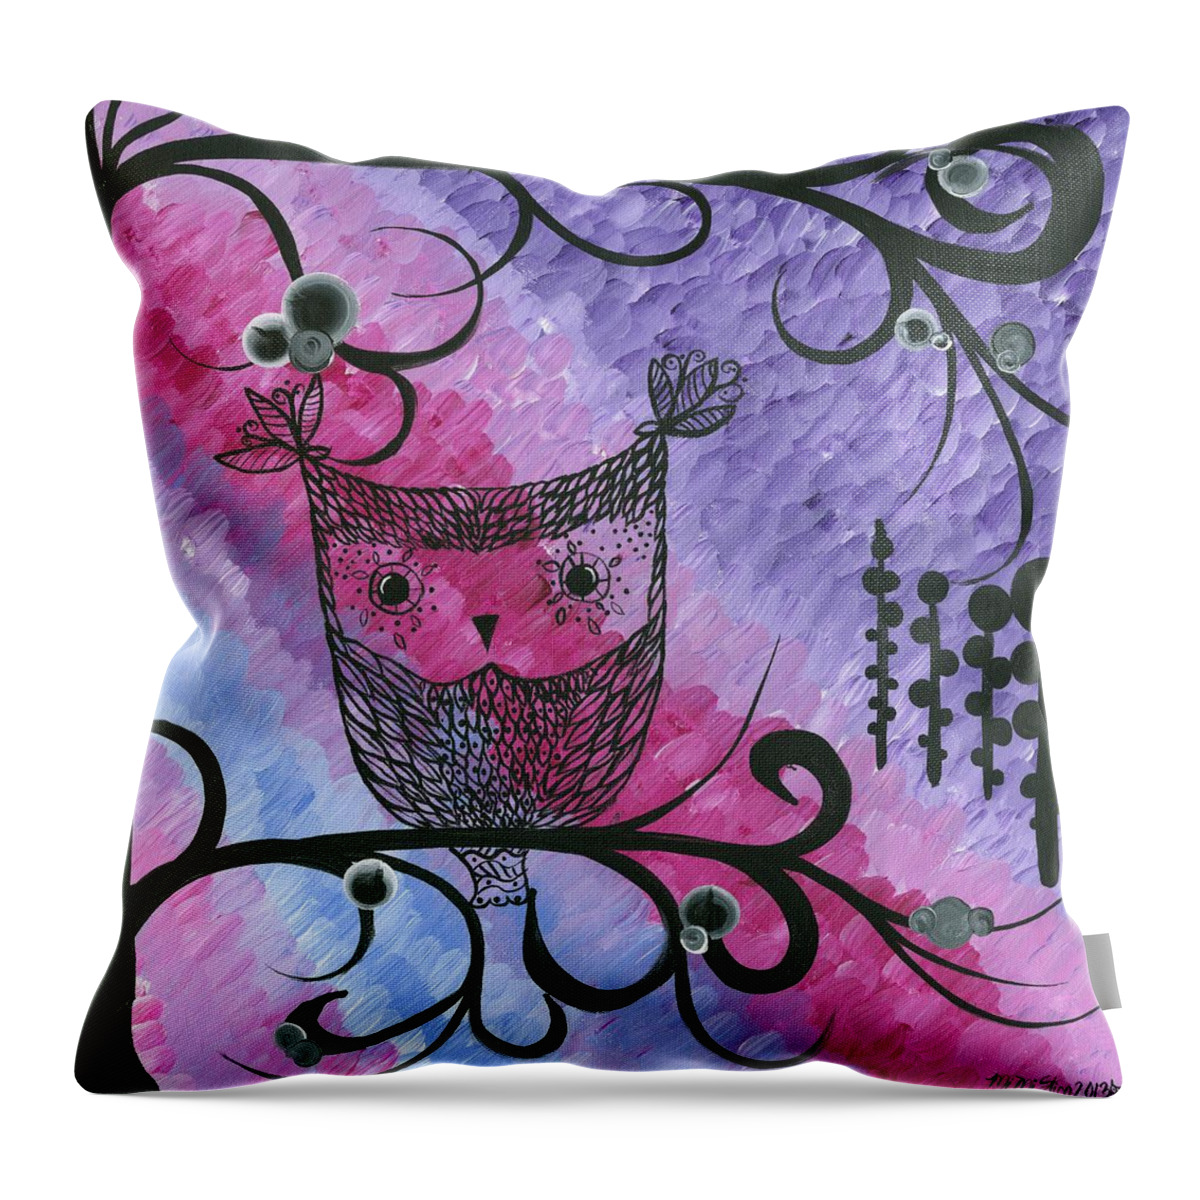 Owls Throw Pillow featuring the painting Hoolandia Contrasts 03 by MiMi Stirn